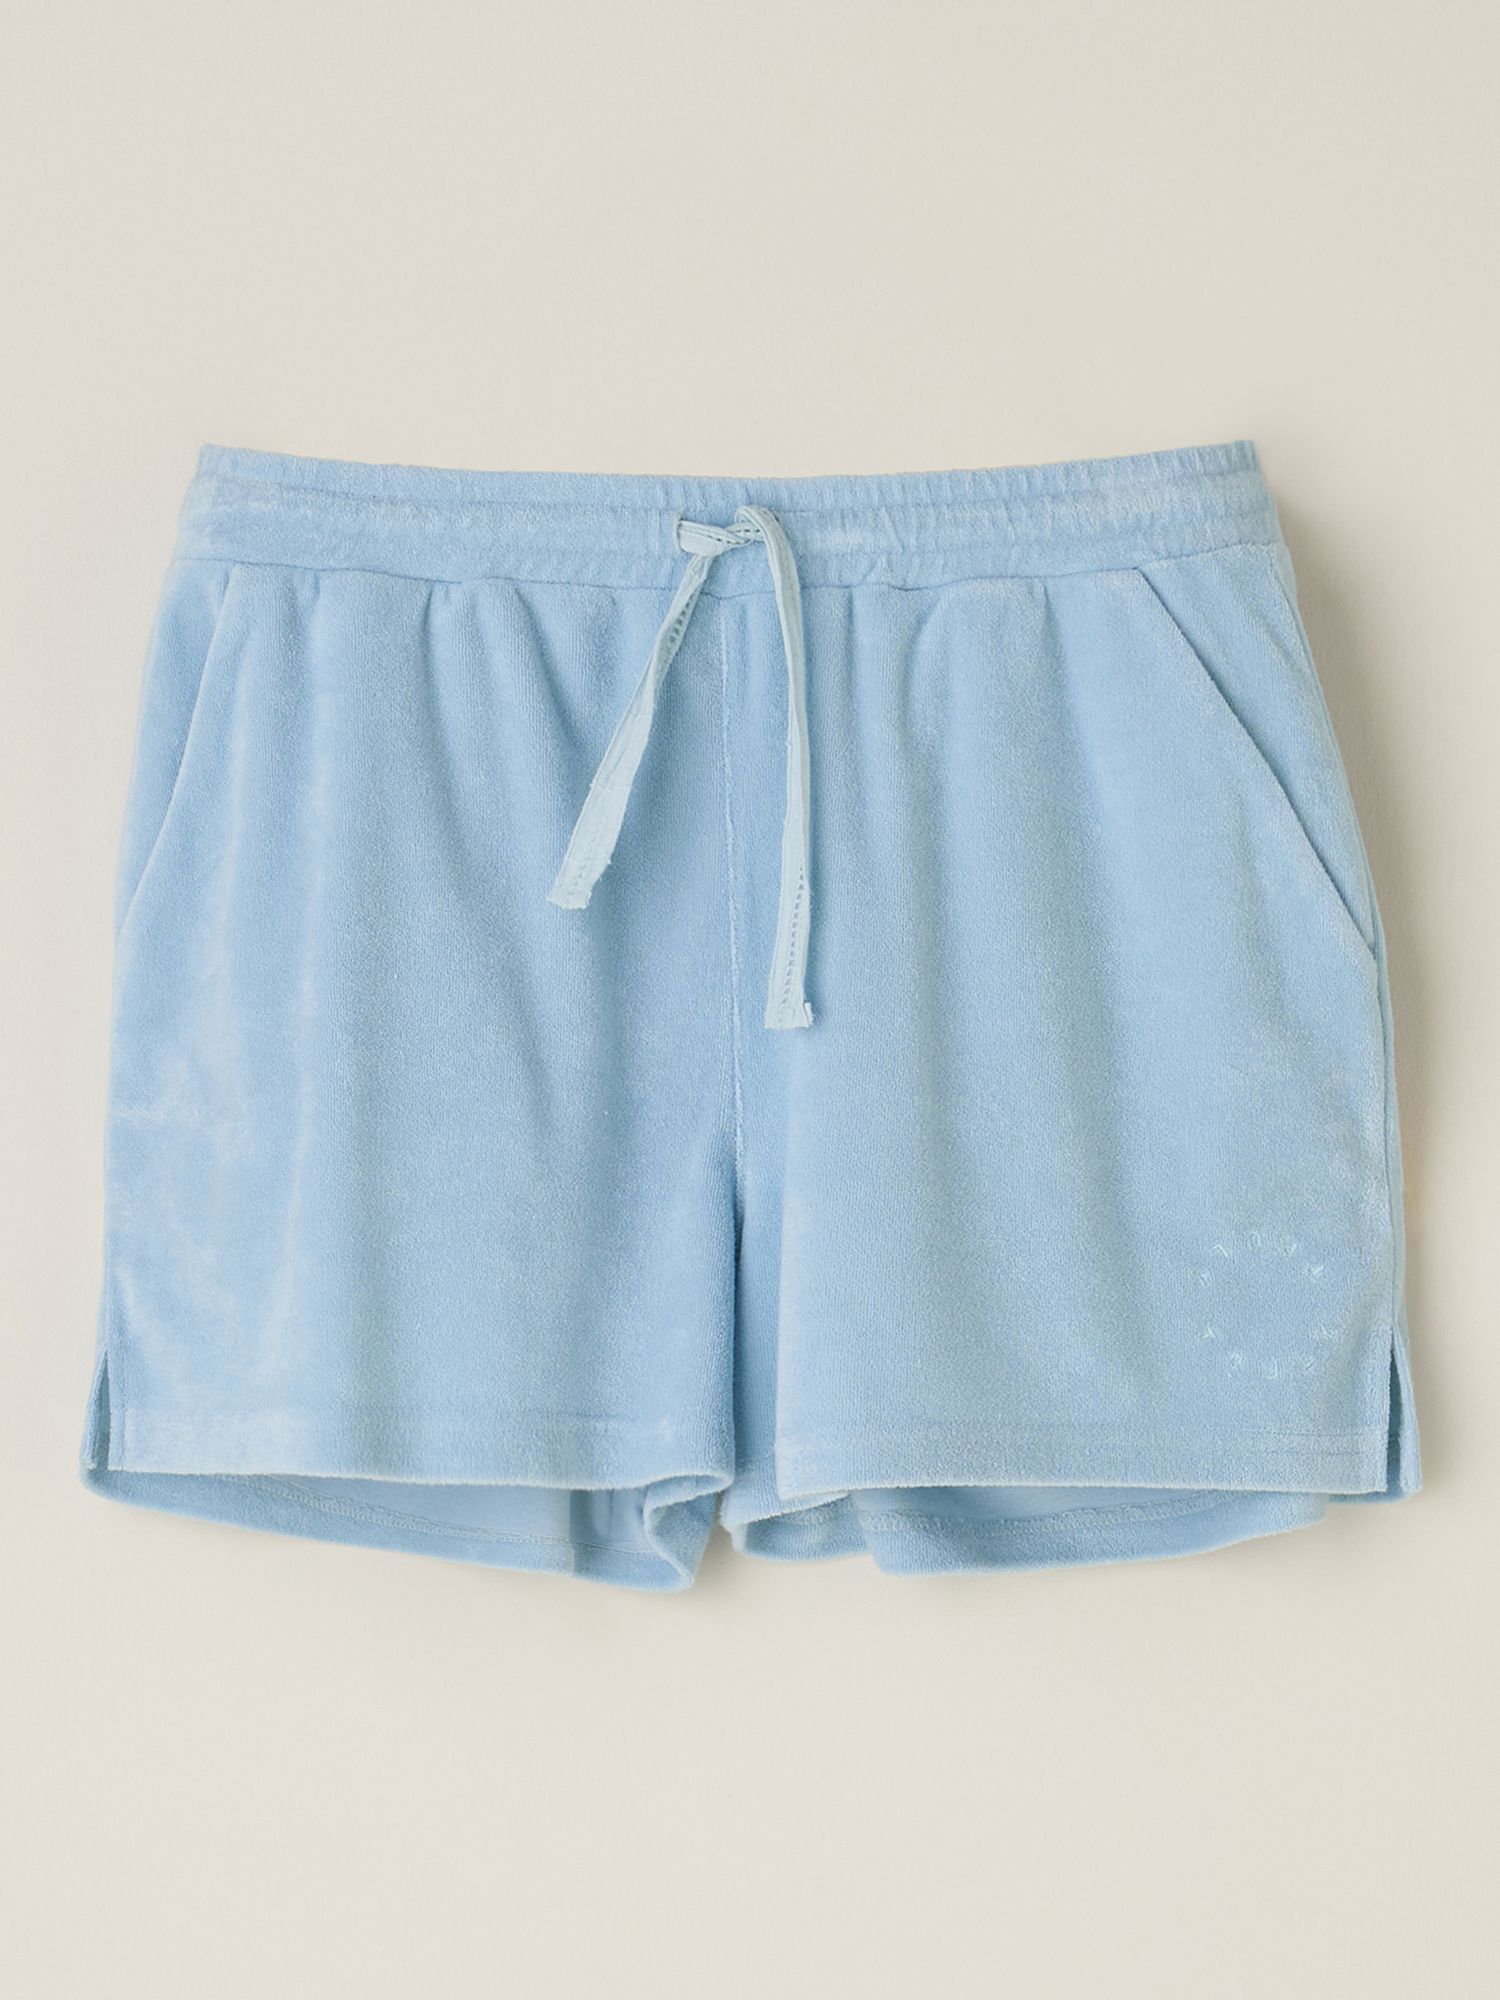 Truly Terry Shorts, Blue, S